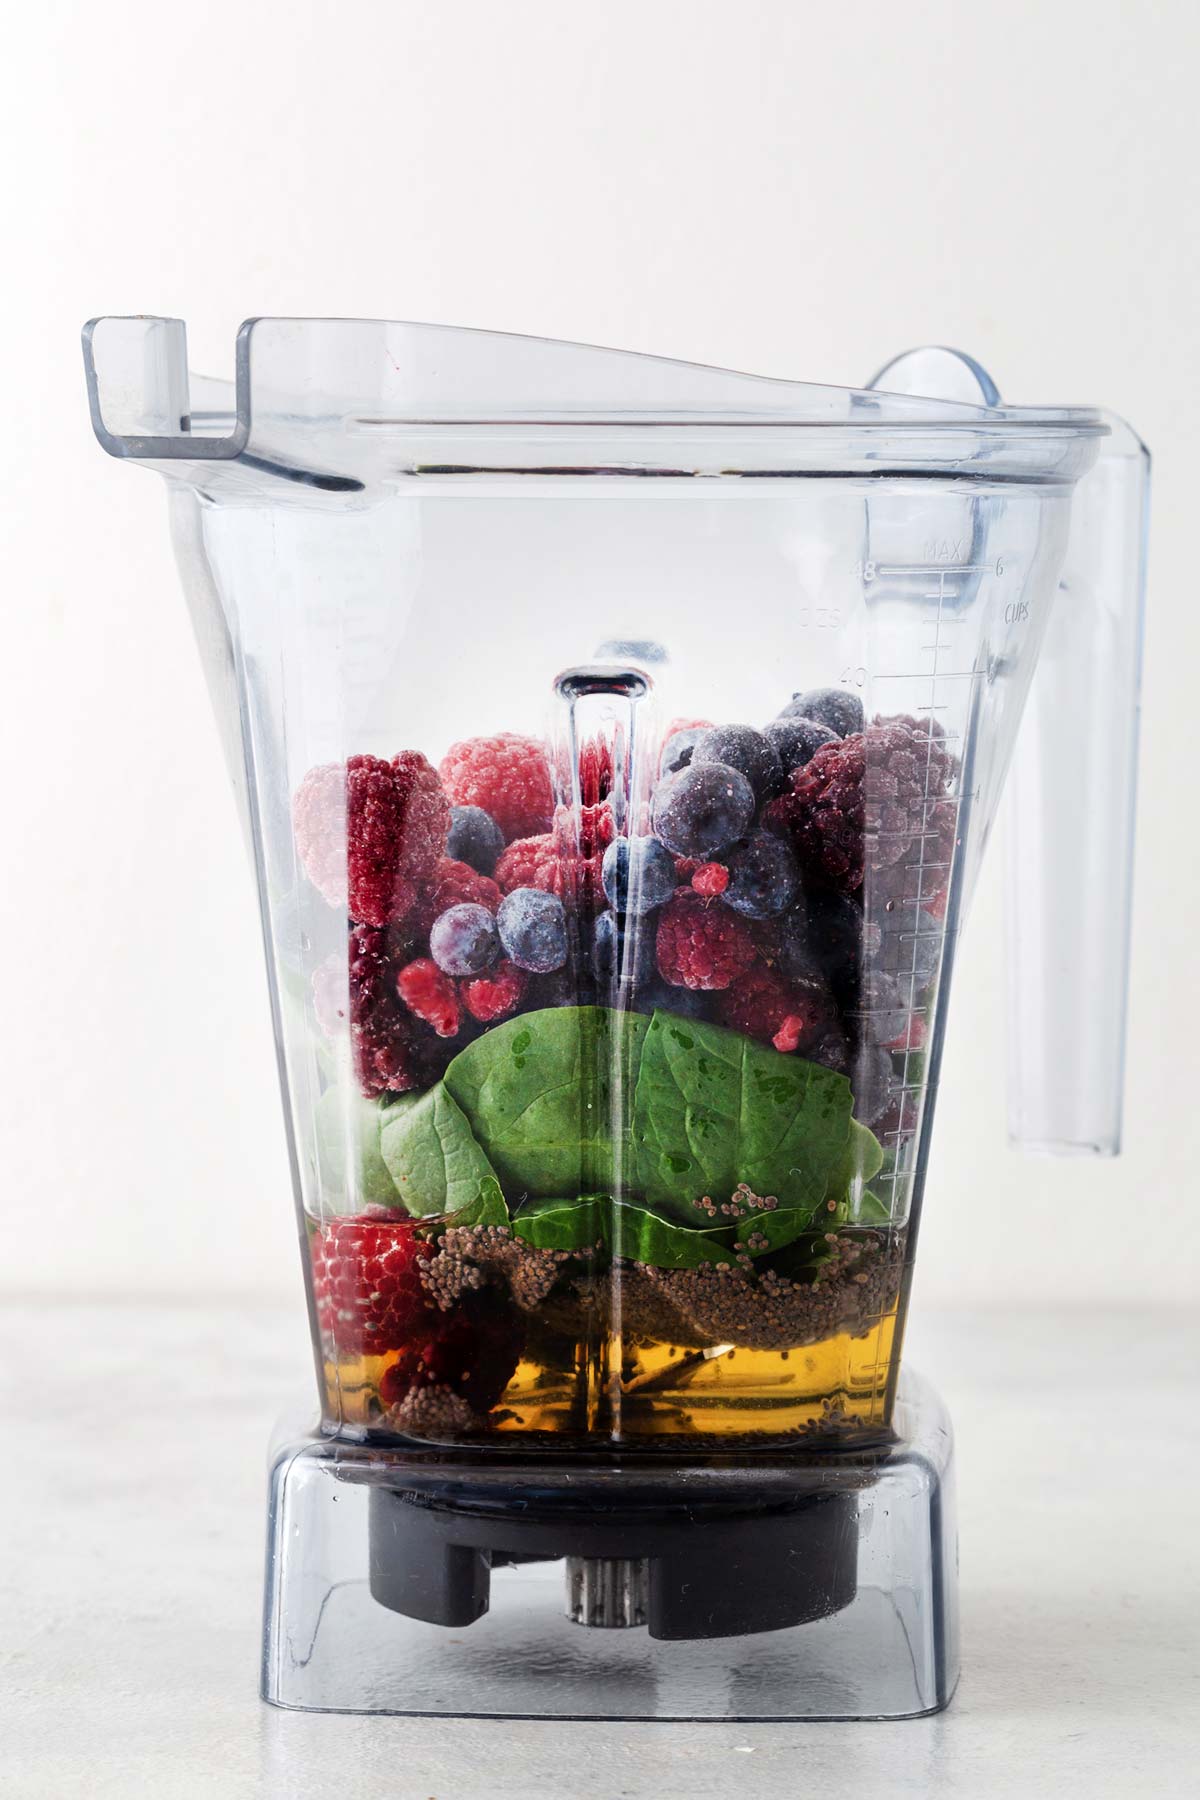 Ingredients for berry smoothie in a blender.